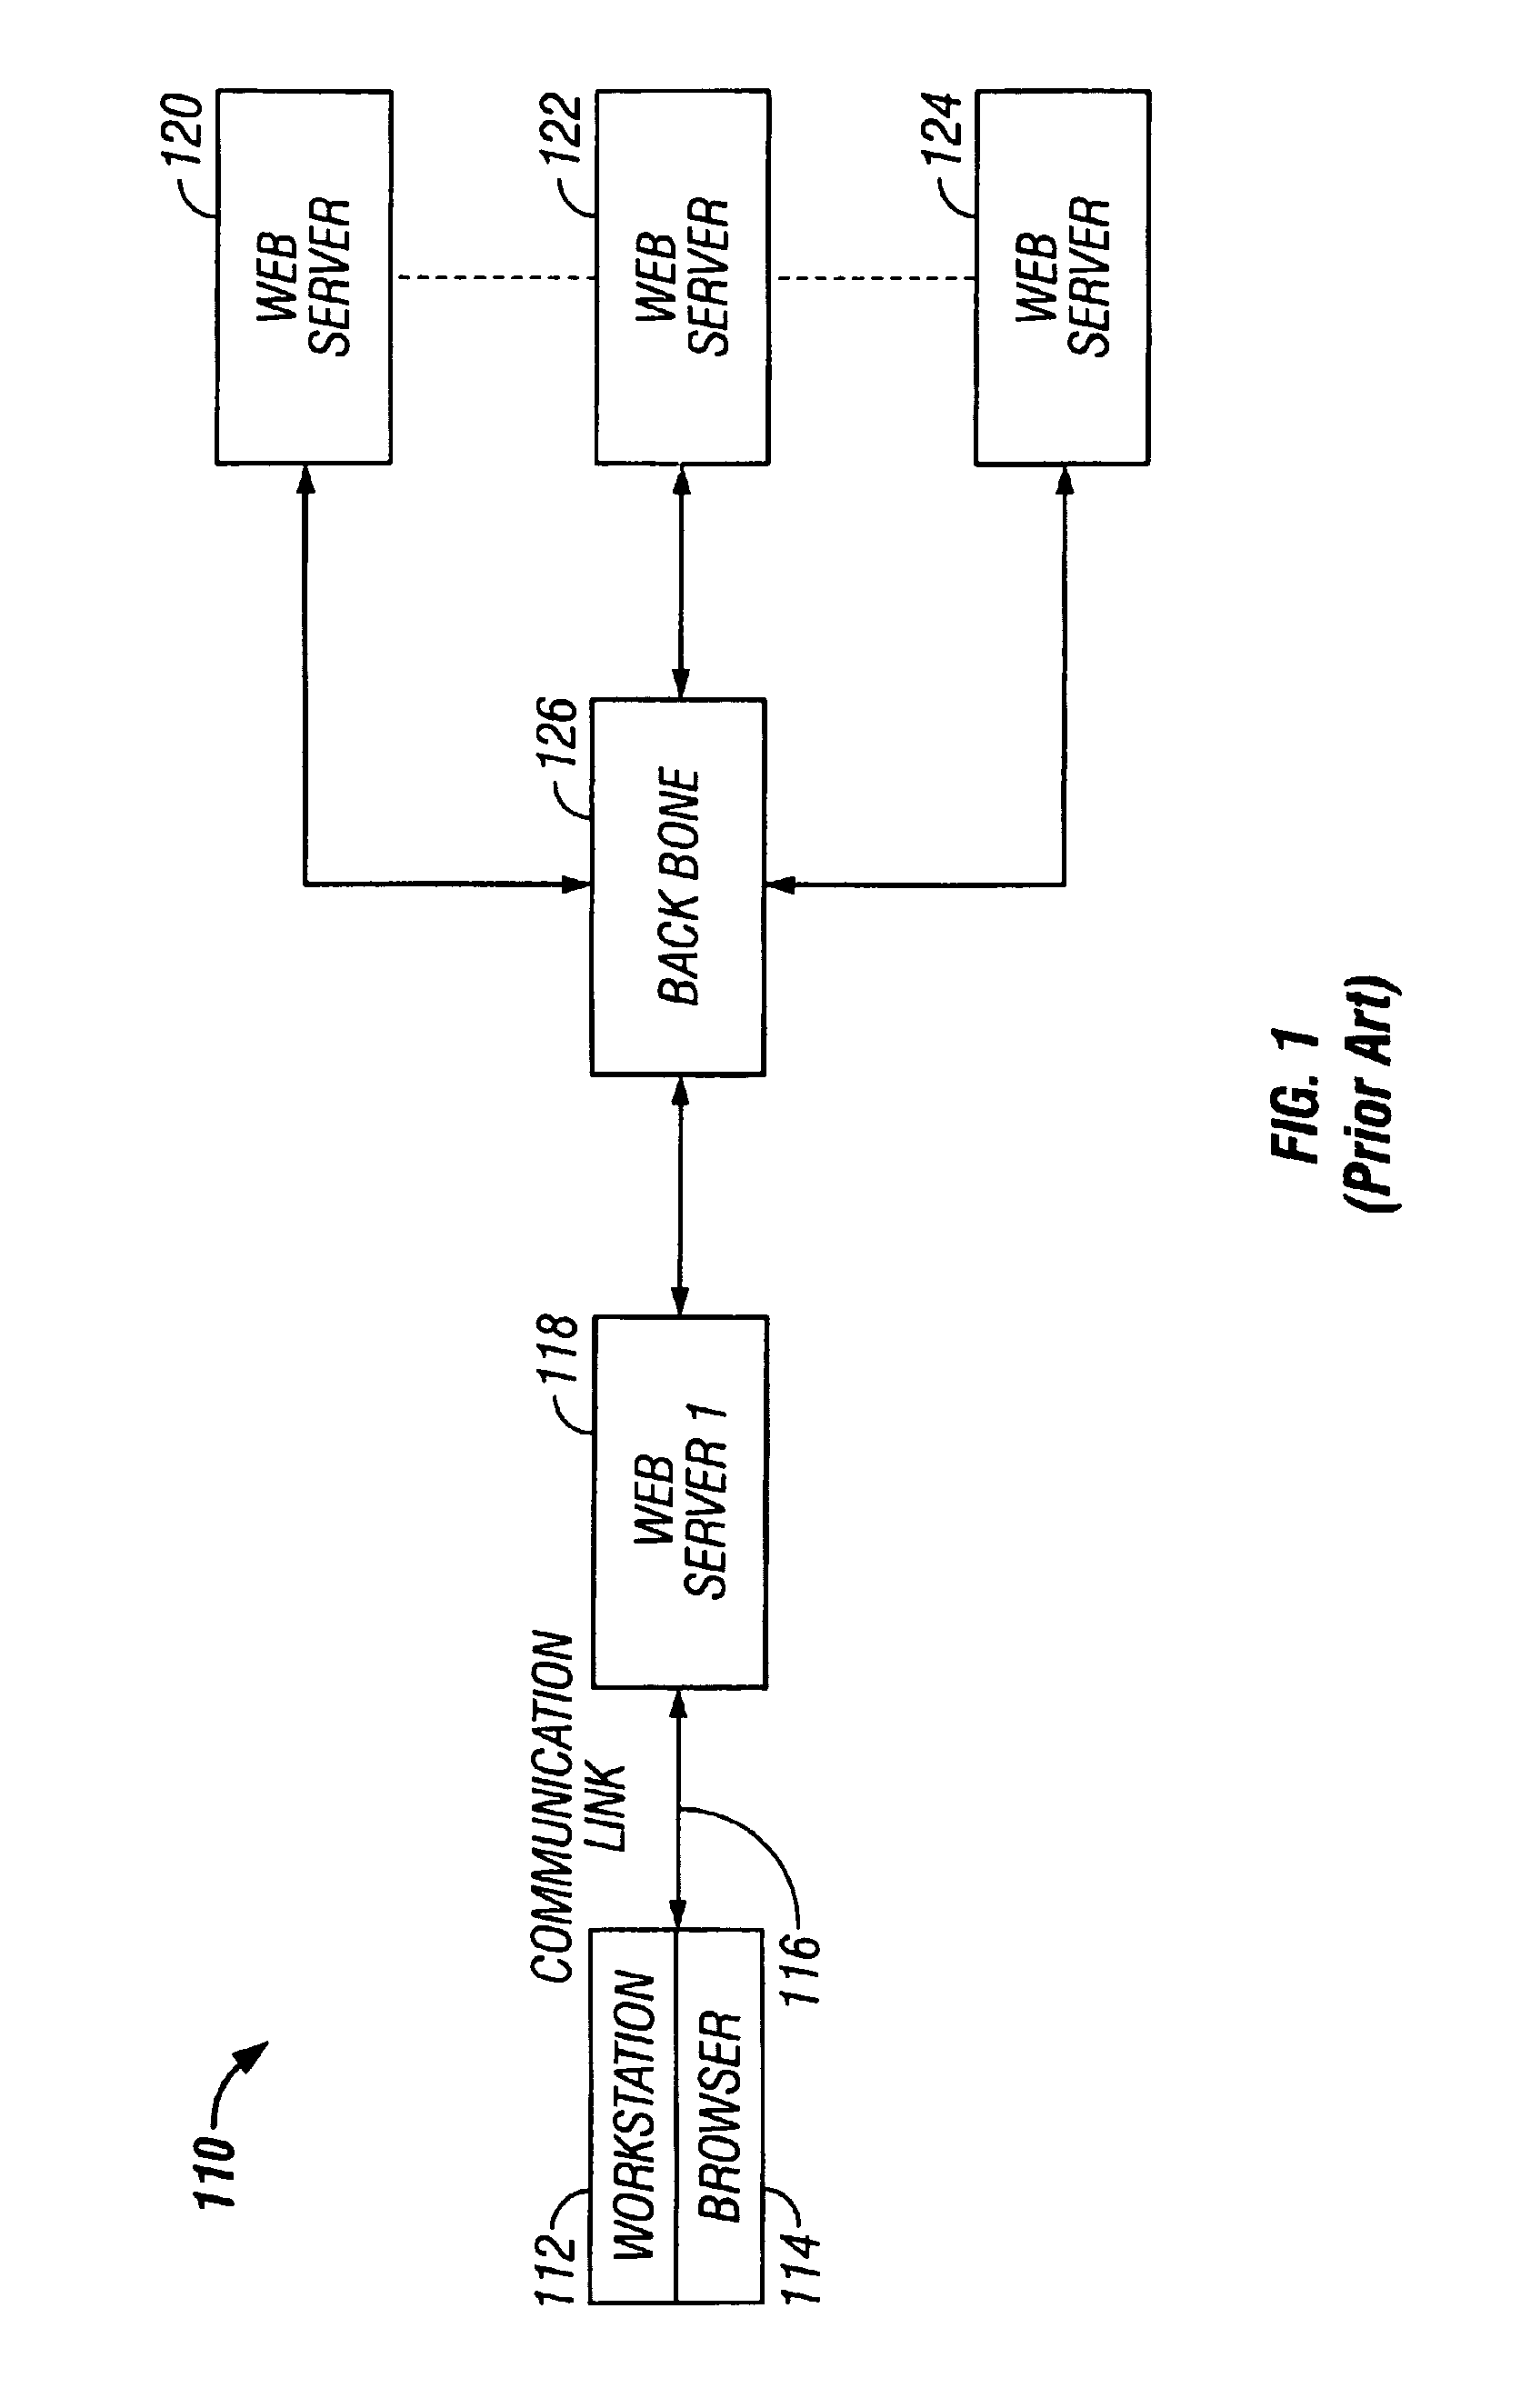 System and apparatus for dynamically generating audible notices from an information network